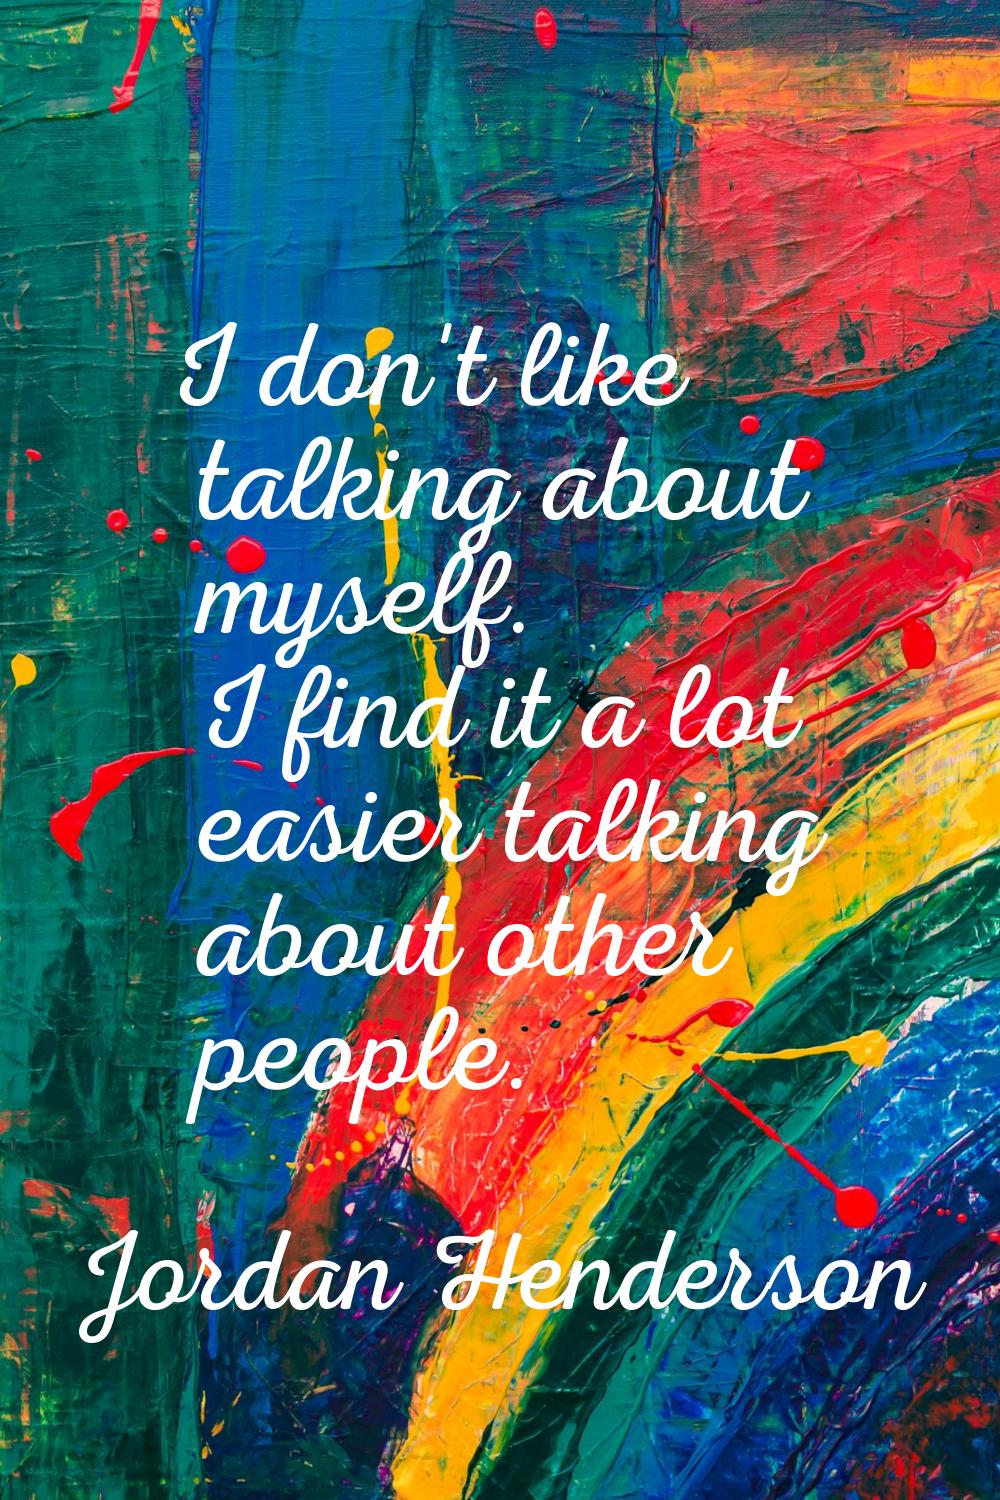 I don't like talking about myself. I find it a lot easier talking about other people.